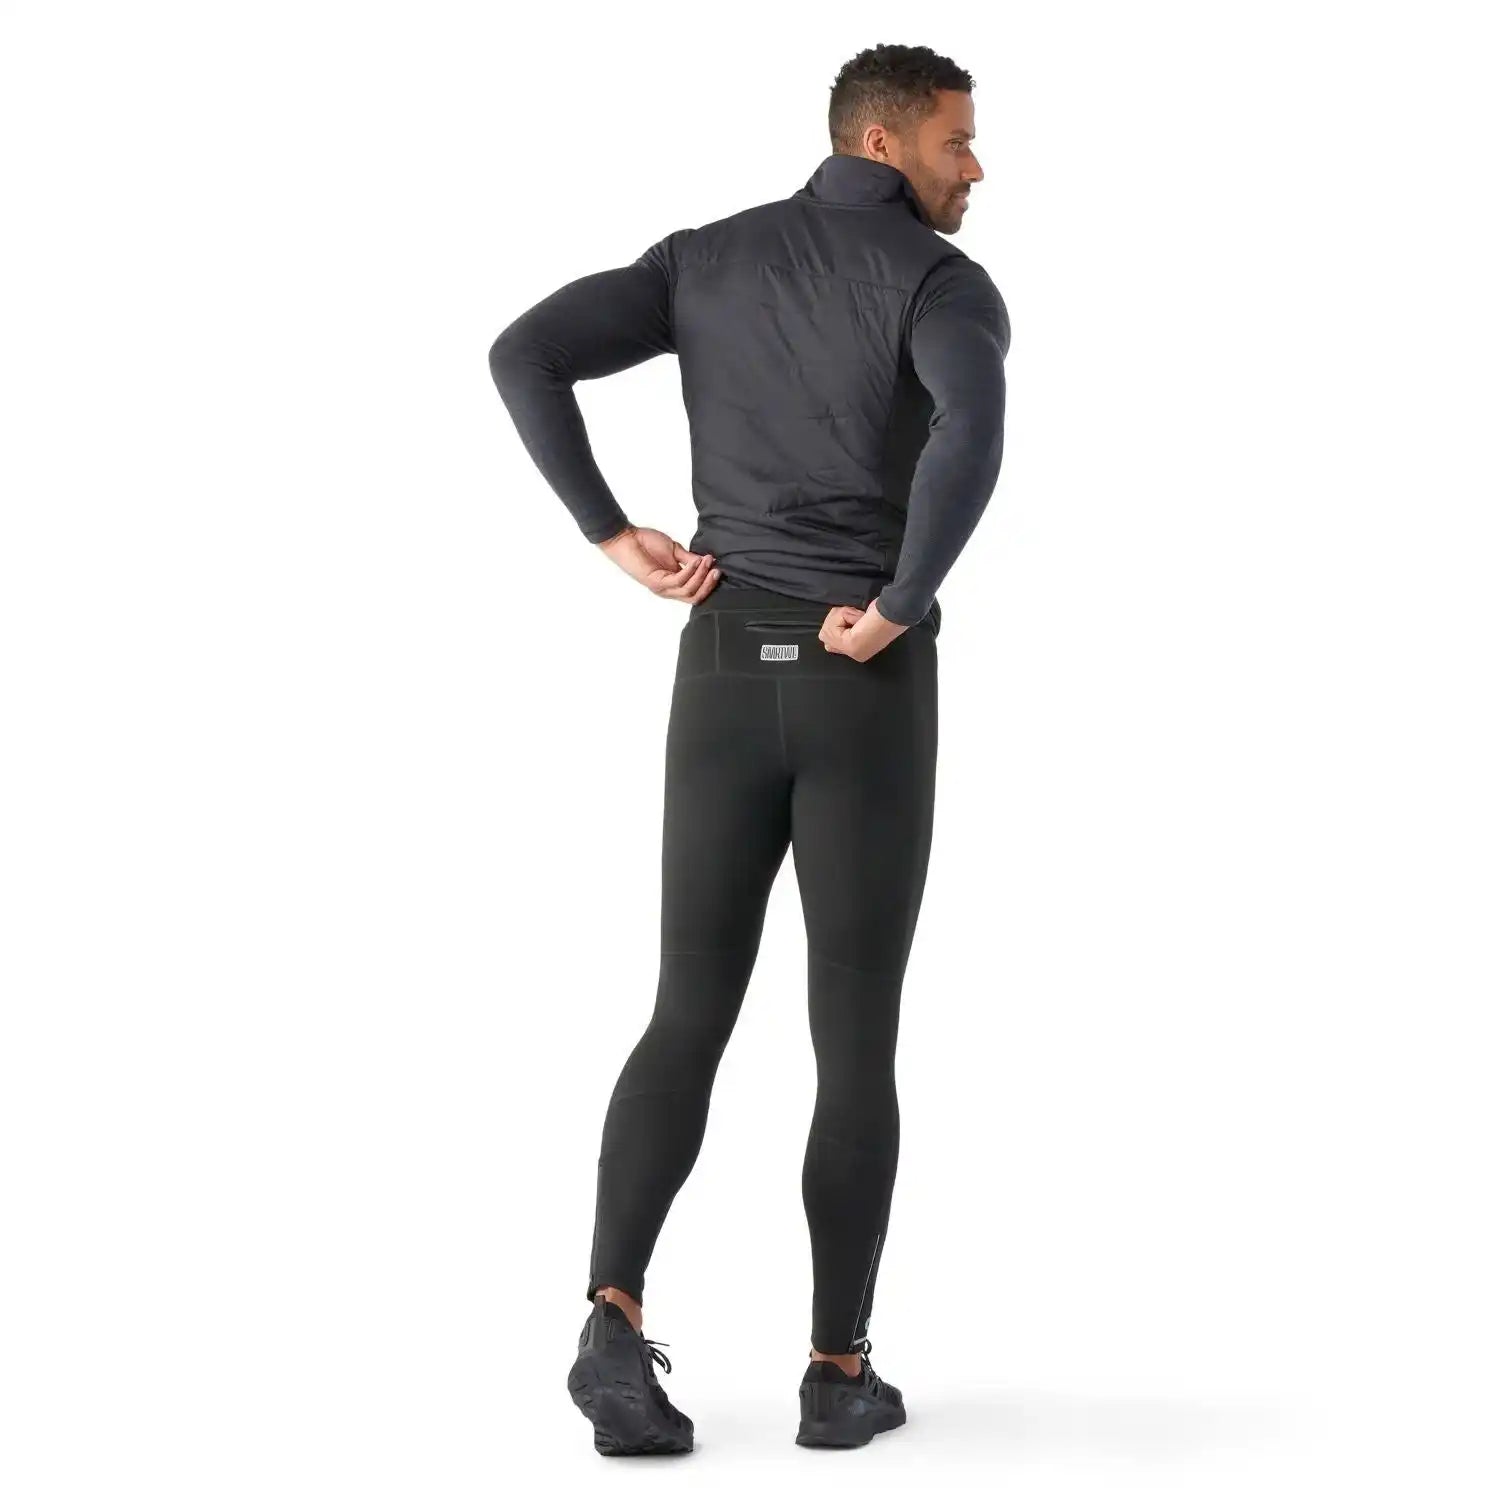 Smartwool M's Active Fleece Wind Tight, Black, back view on model